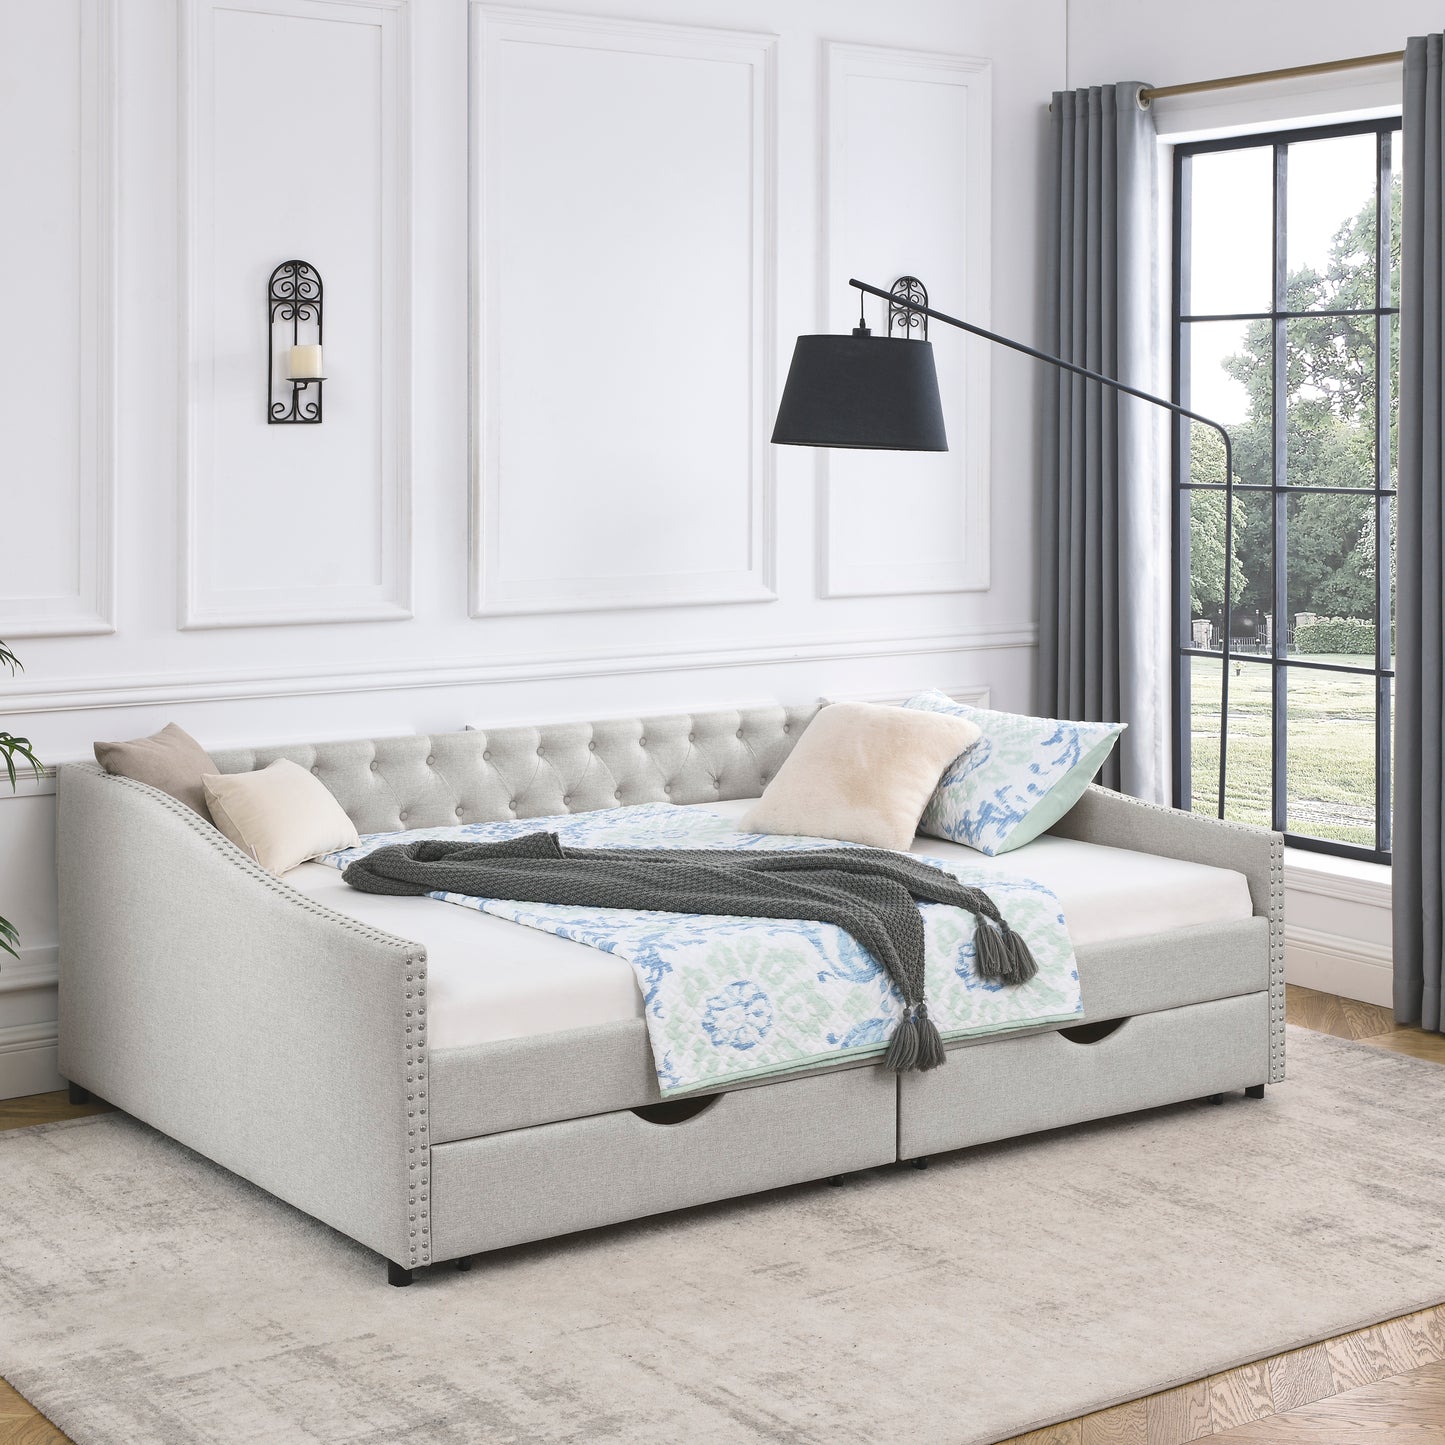 Queen Size Upholstered Tufted Daybed with Drawers, Button on Back and Copper Nail on Waved Shape Arms, Beige